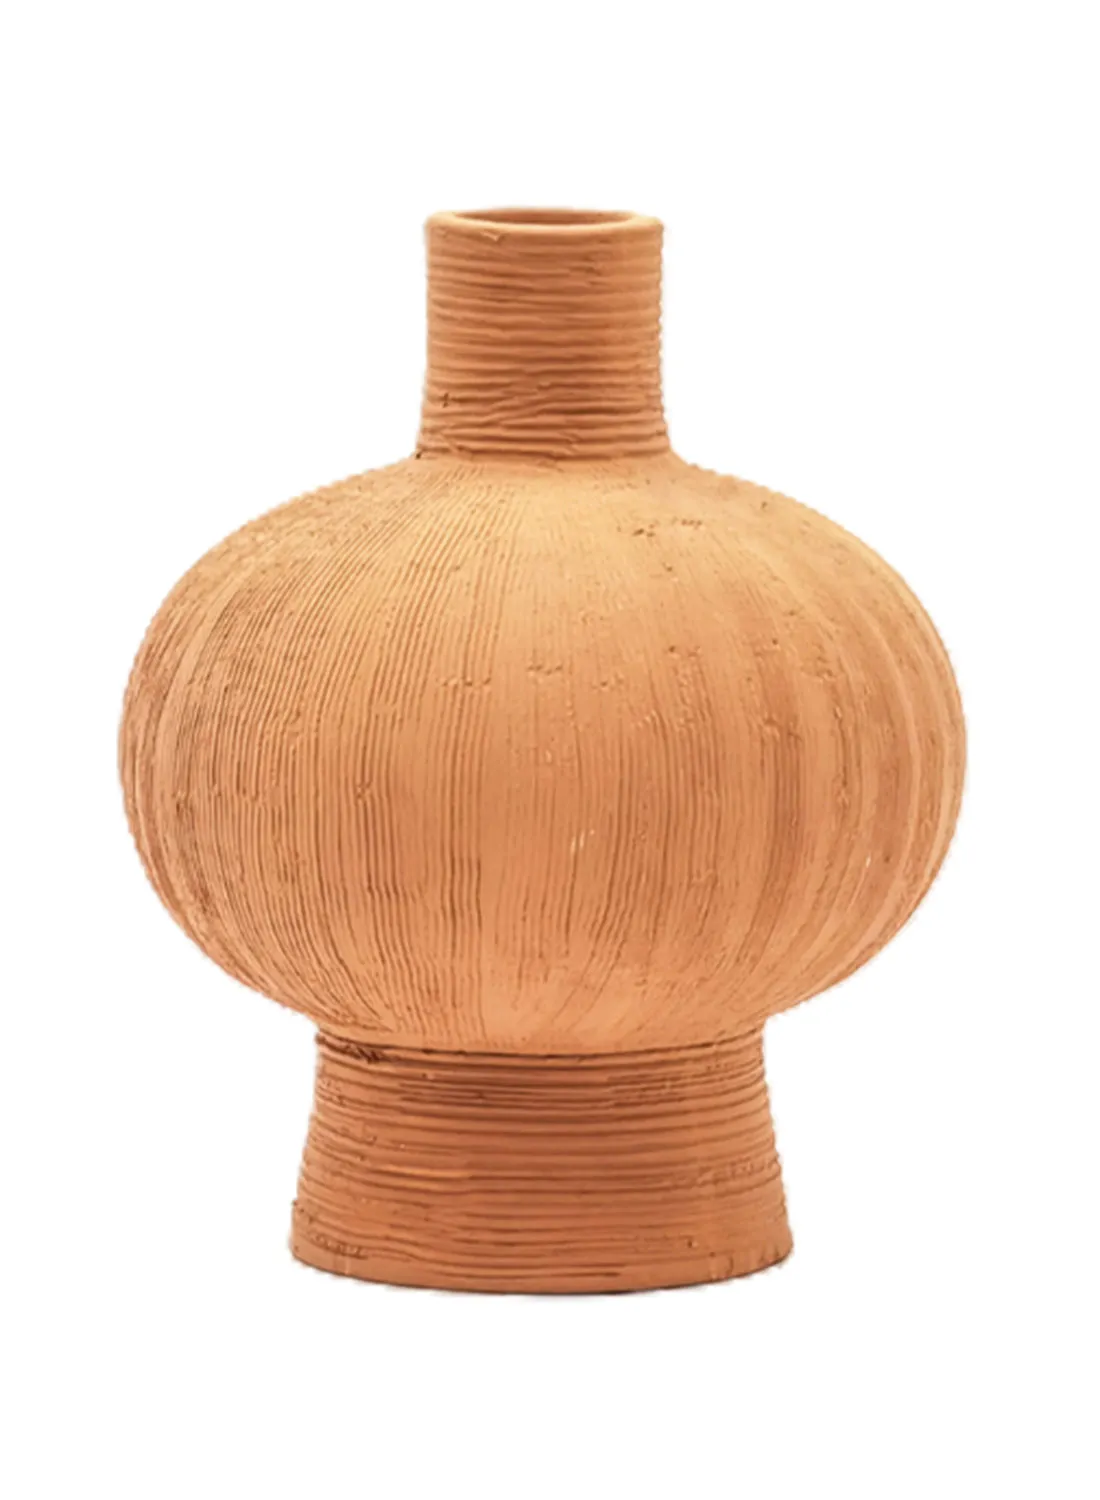 Switch Modern Geometric Shape Ceramic Vase With Textured Surface For The Perfect Stylish Home N13-023 Mustard 13 x 16.3cm